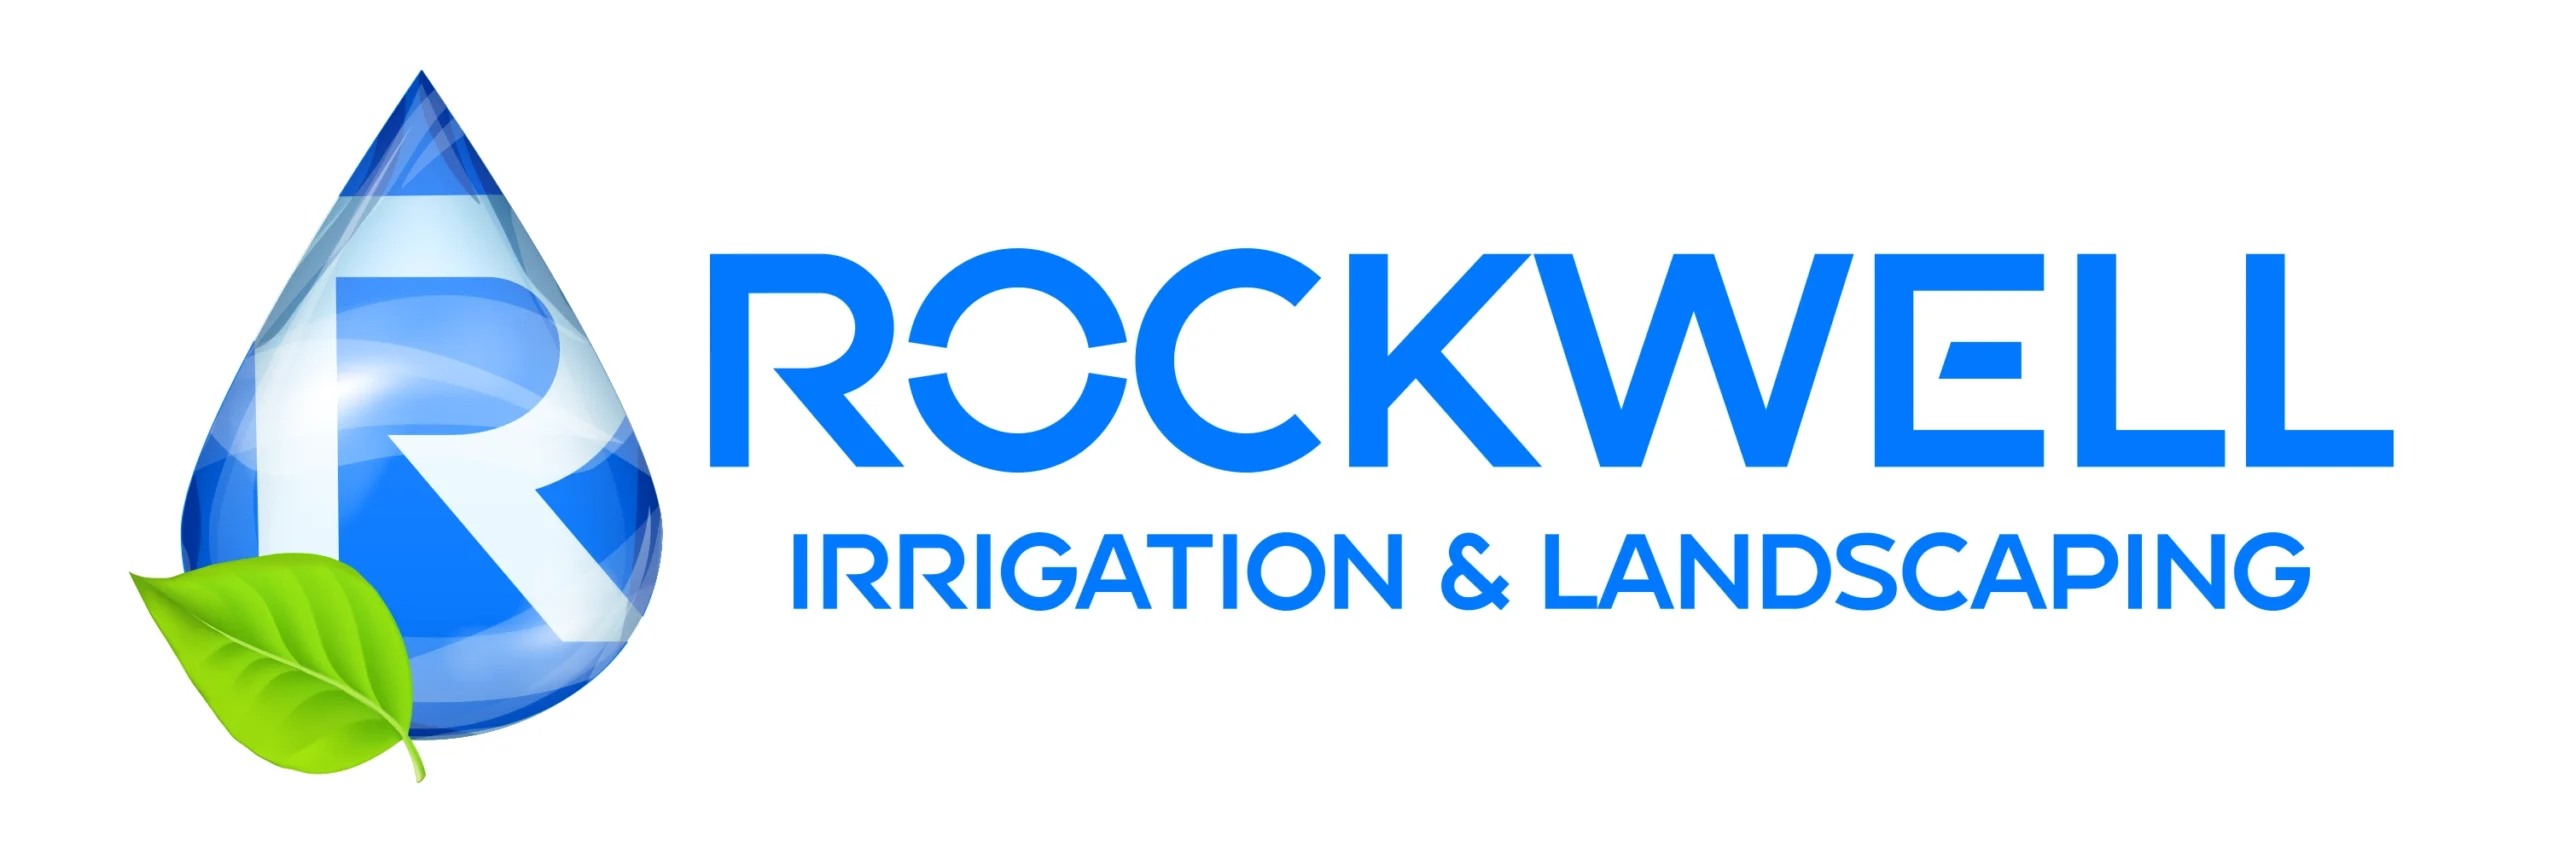 Rockwell Irrigation and Landscaping